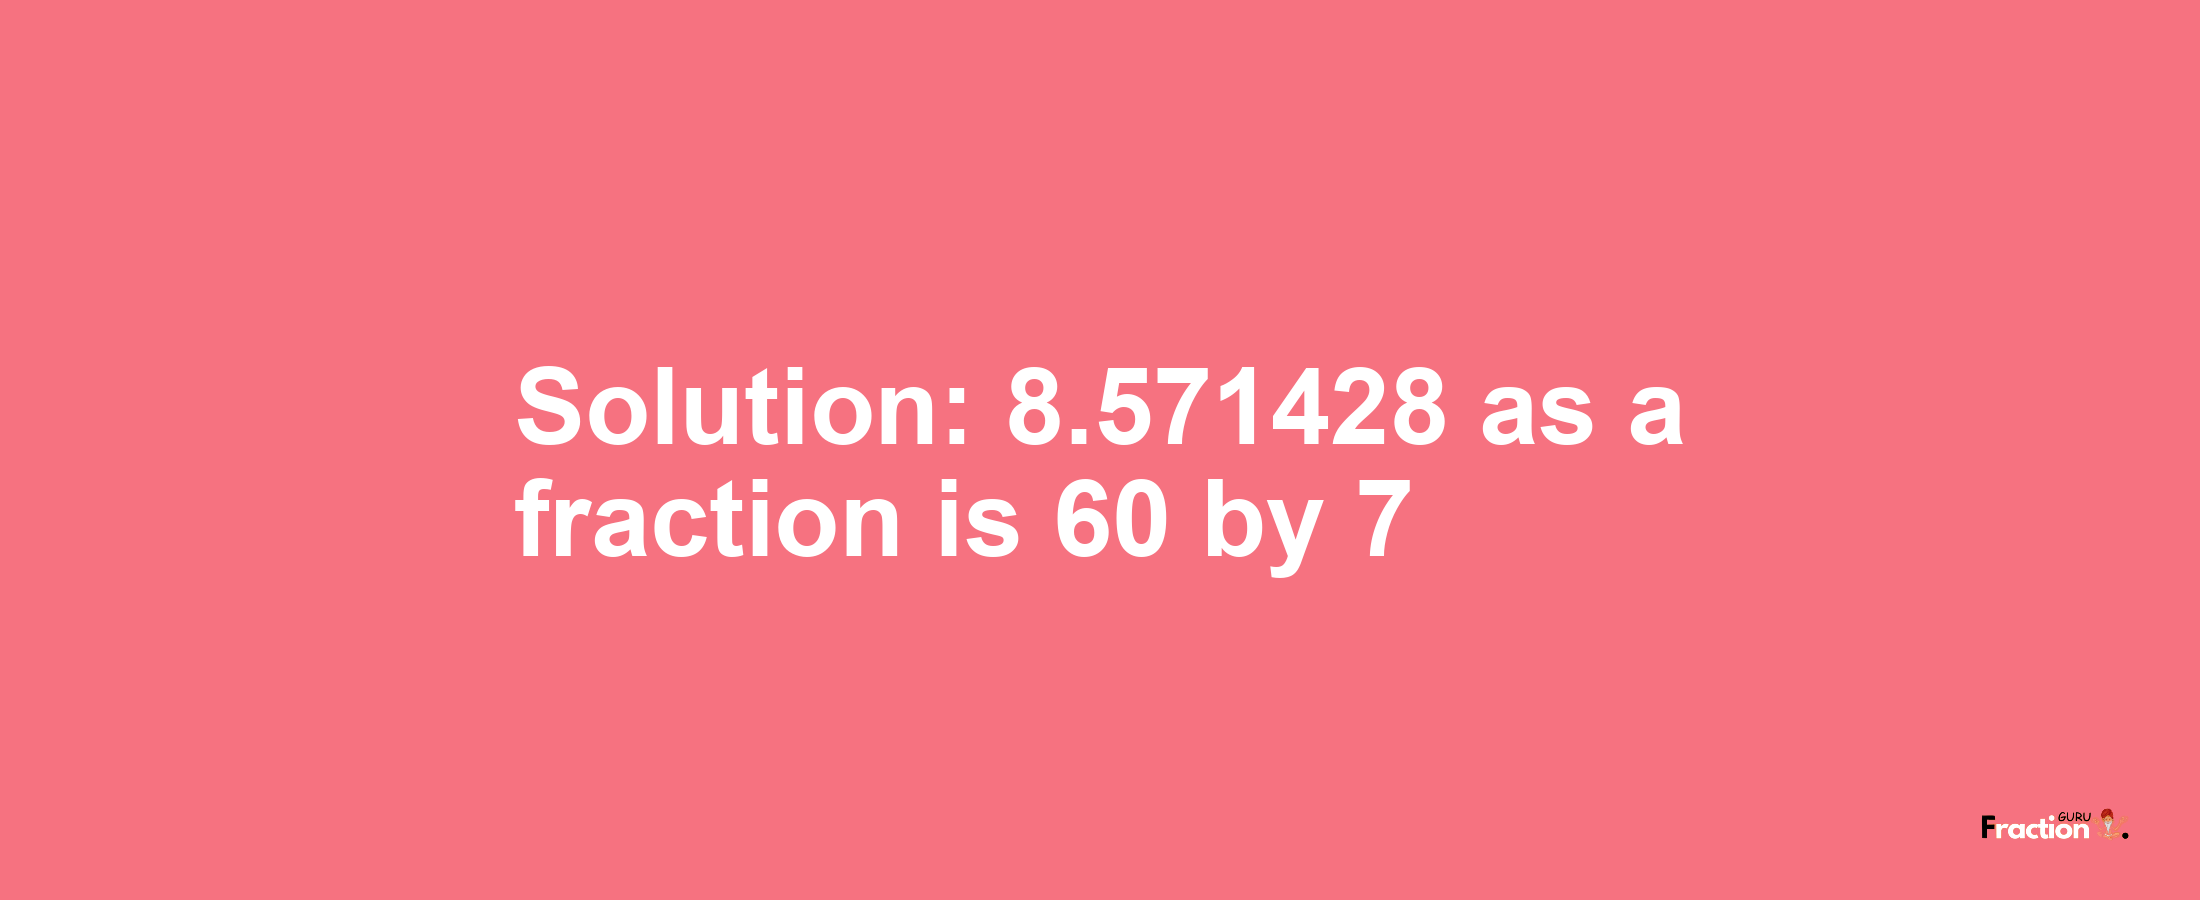 Solution:8.571428 as a fraction is 60/7